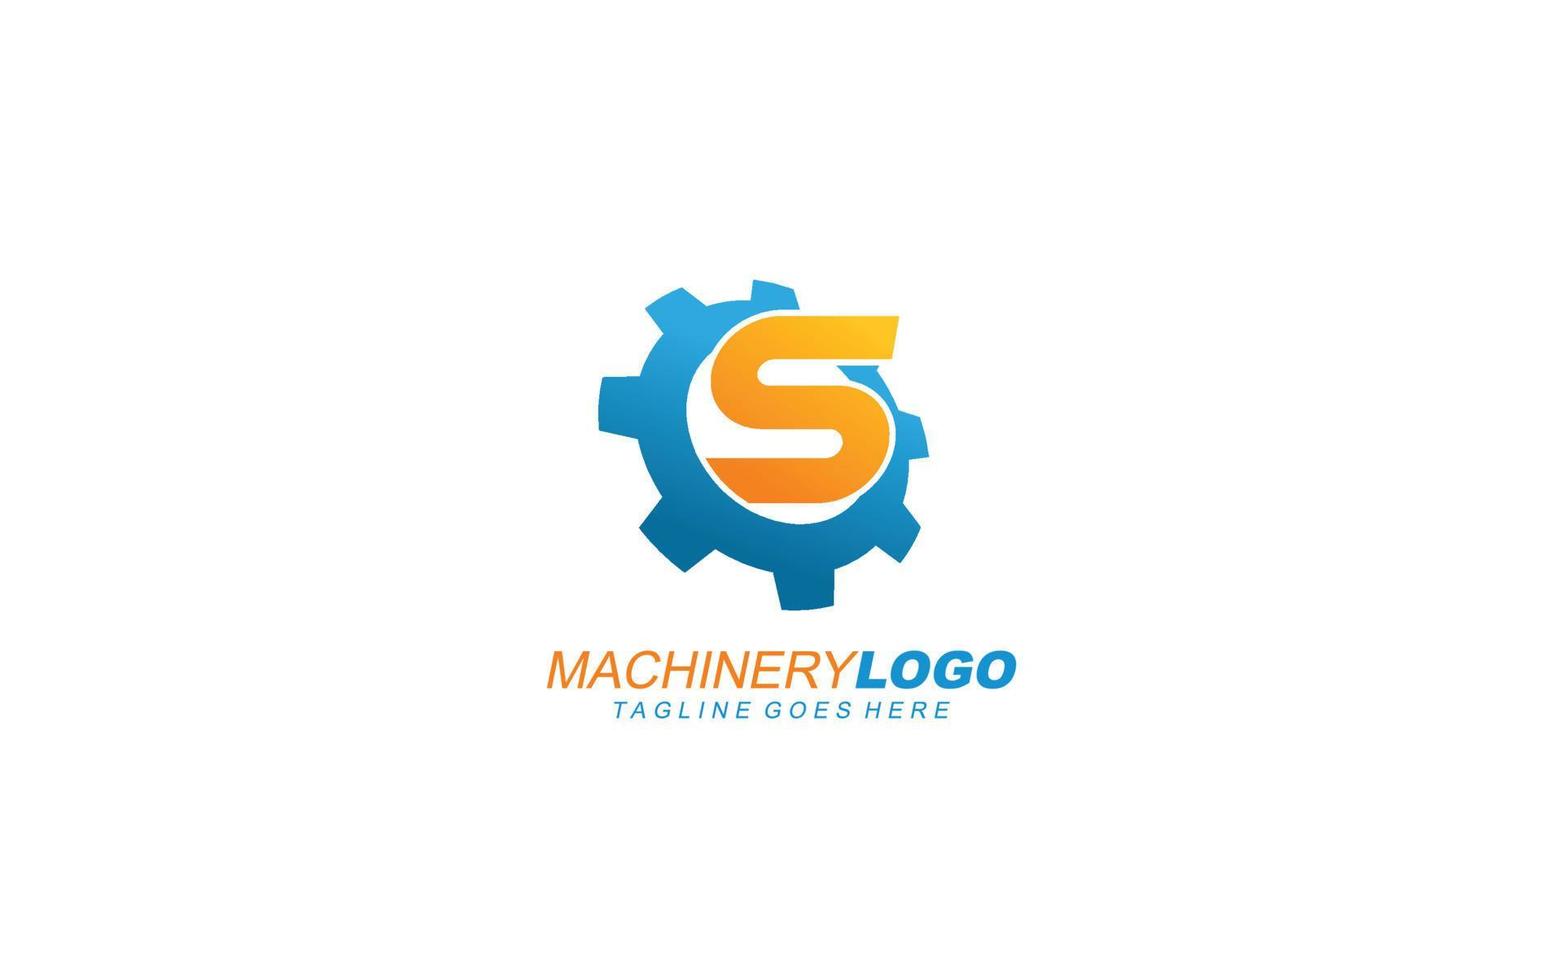 S logo gear for identity. industrial template vector illustration for your brand.